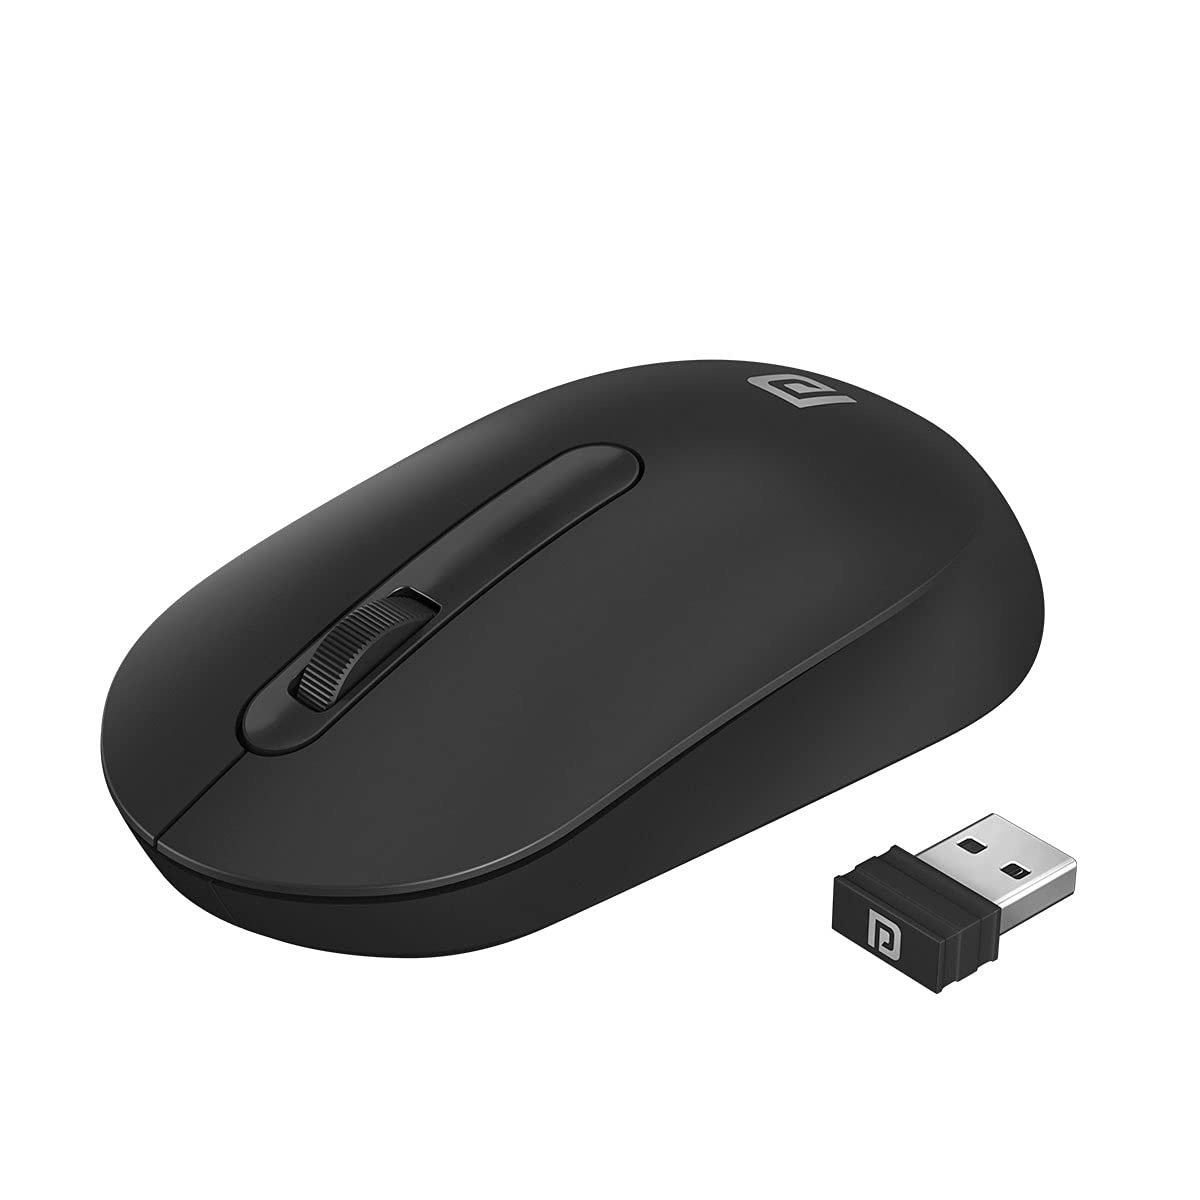 lost-dongle-solutions-for-recovering-and-replacing-a-mouse-dongle